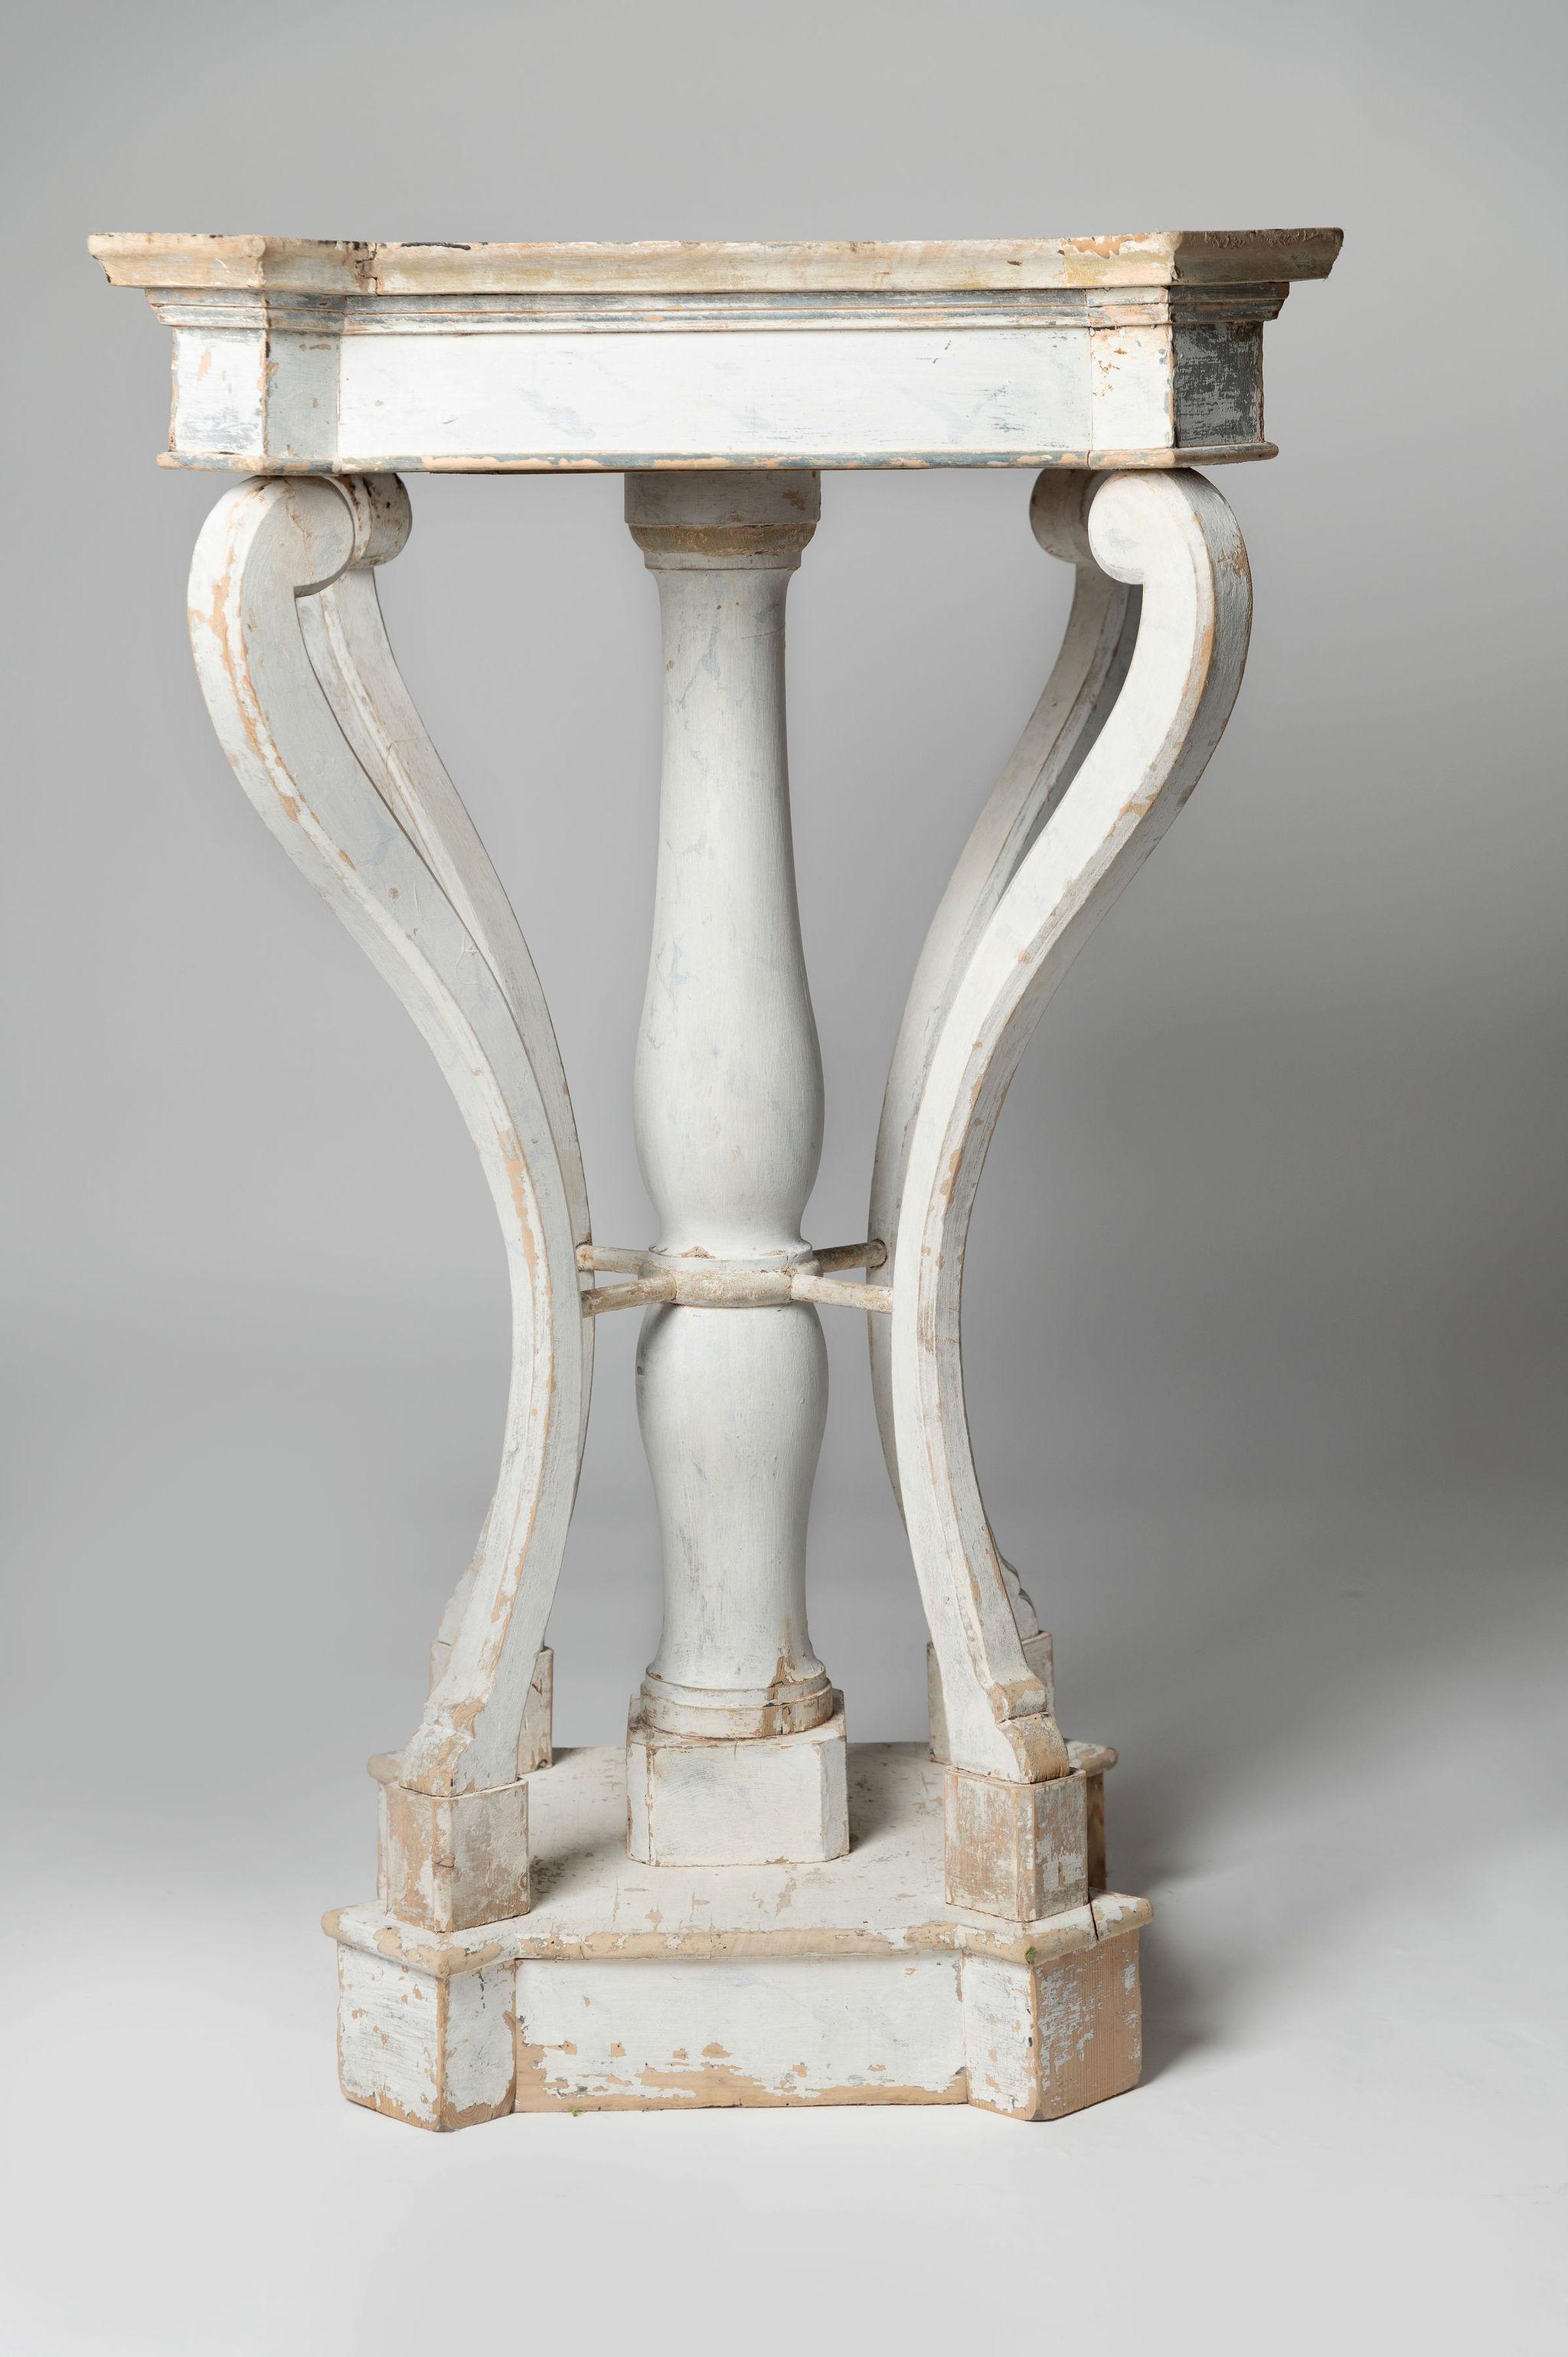 Unusual 19th Century French table – plinth, original paint, strong and sound, a good size top to display a statue, big lamp etc, 18.75 inches x 18.75 inches on the top.
The 16th Century carved stone statue is available for sale separately on the